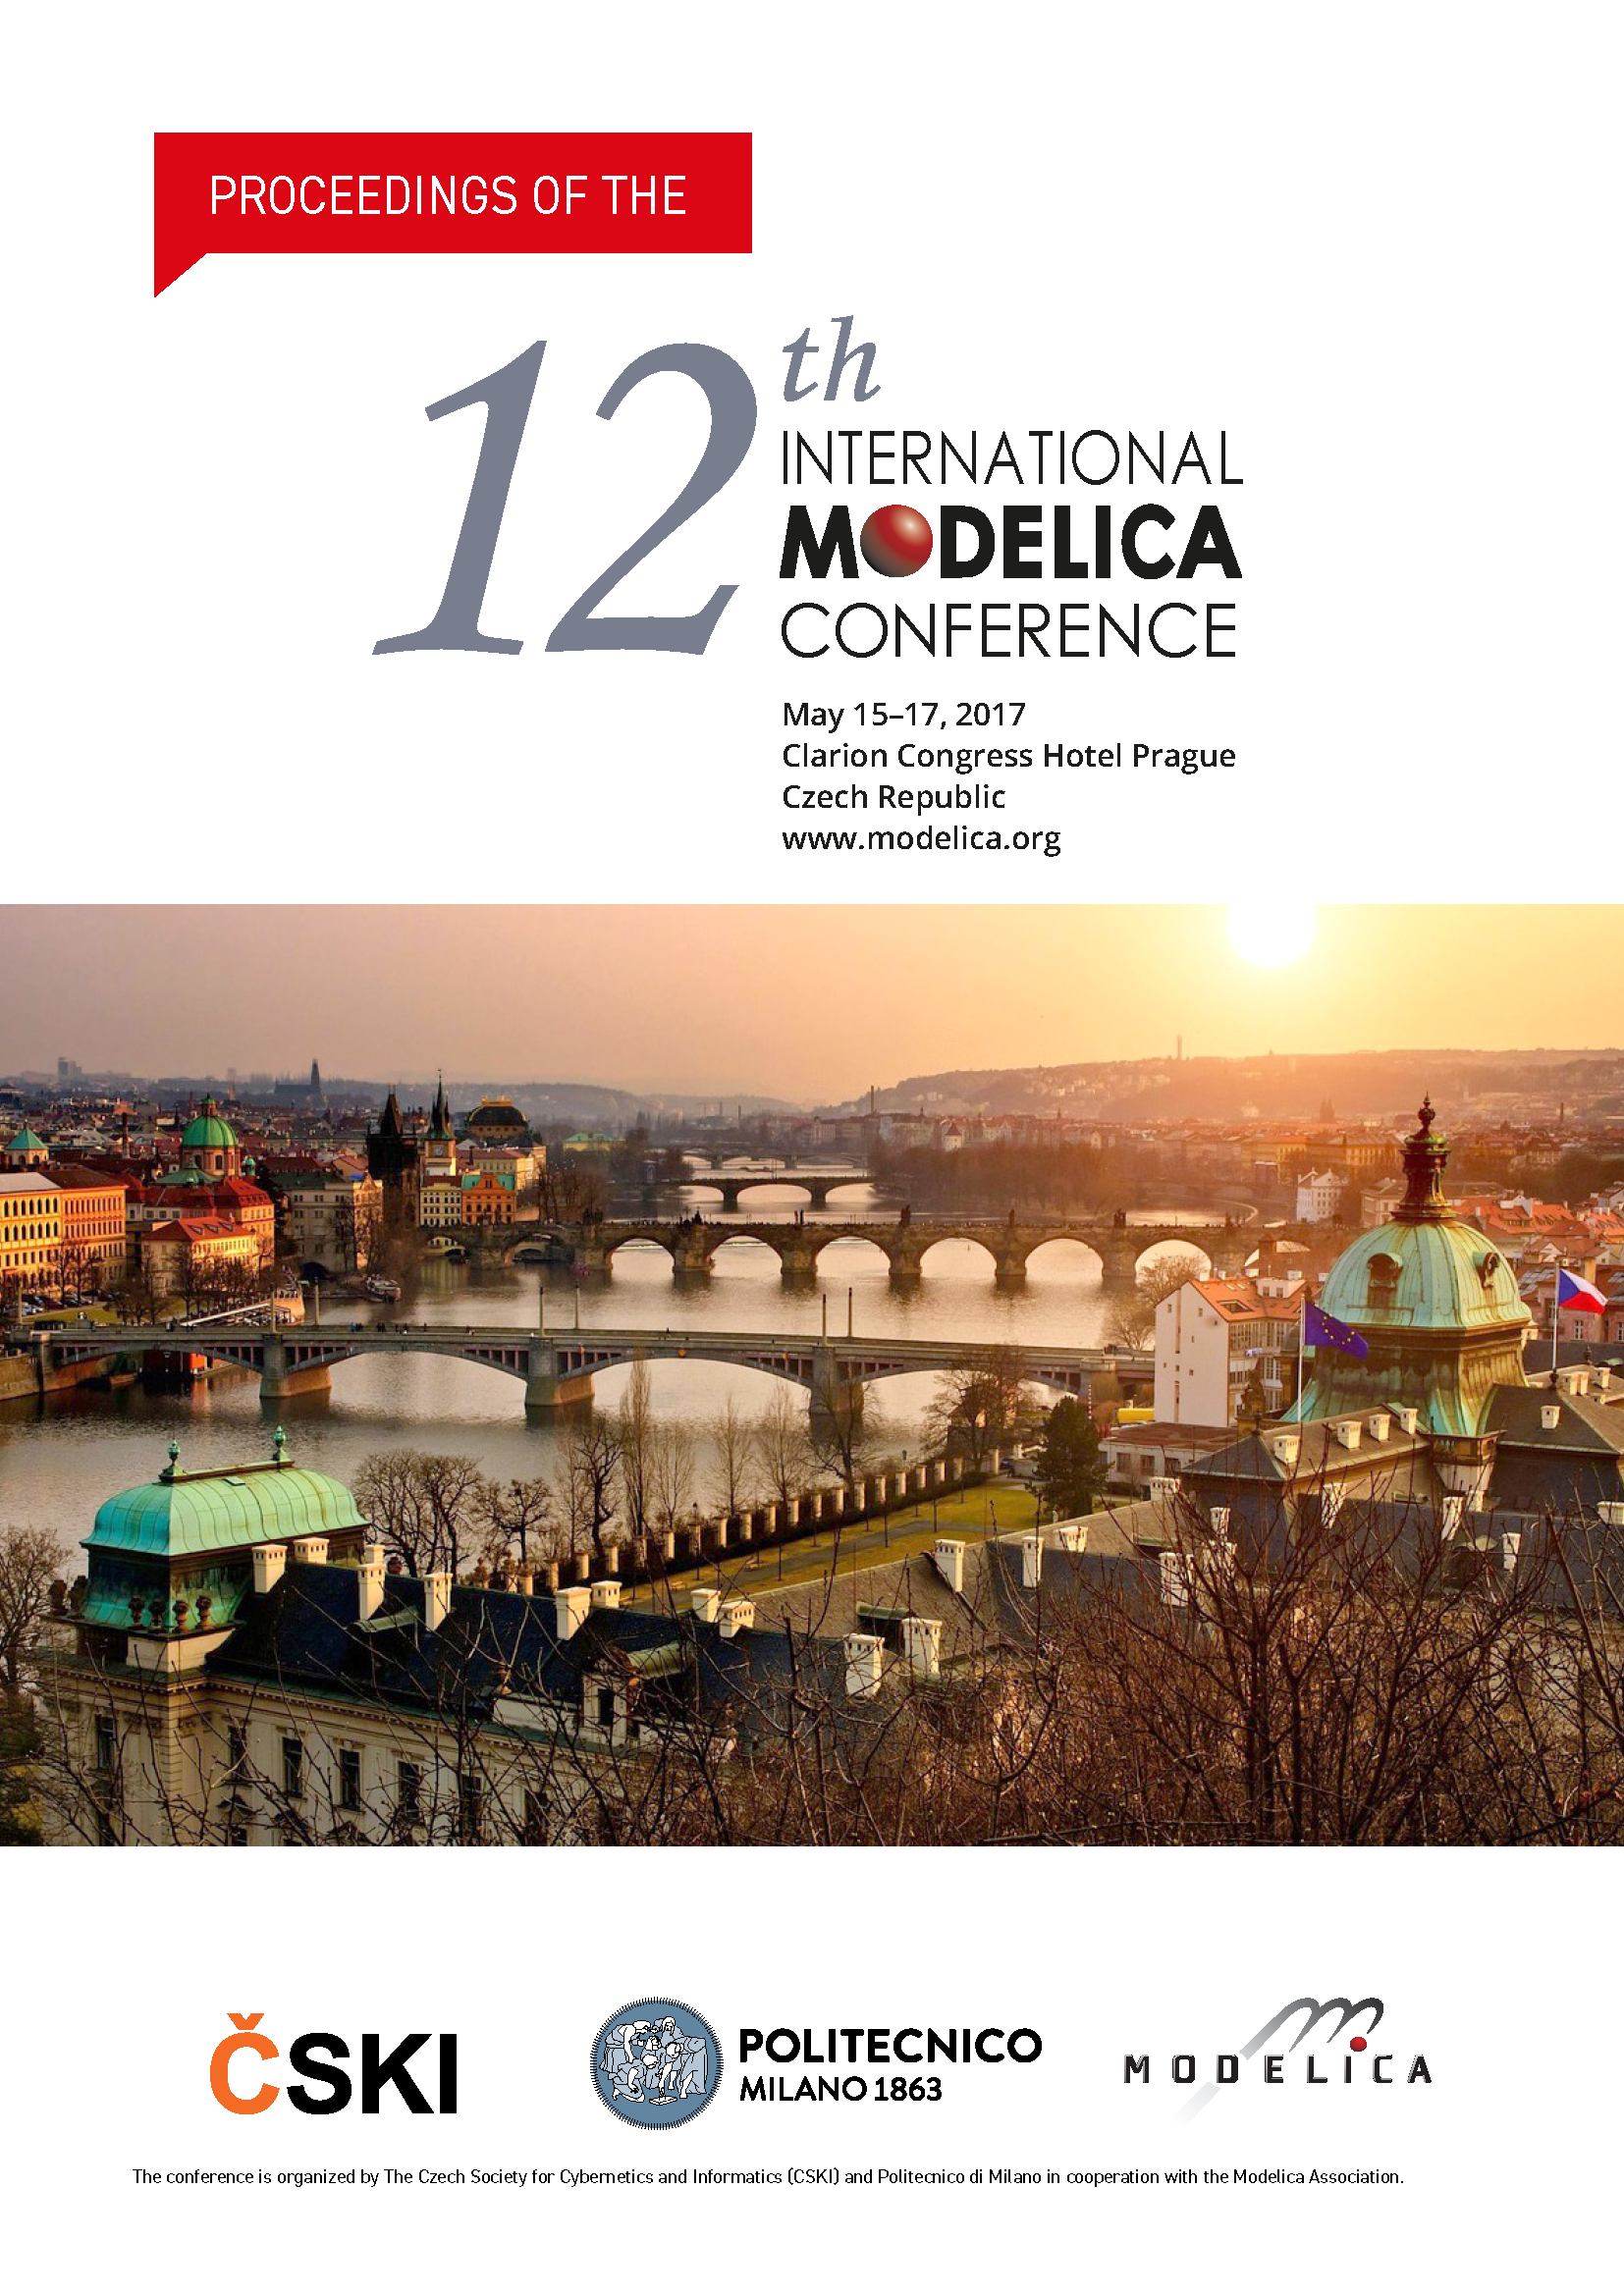 					View Proceedings of the 12th International Modelica Conference, Prague, Czech Republic, May 15-17, 2017
				